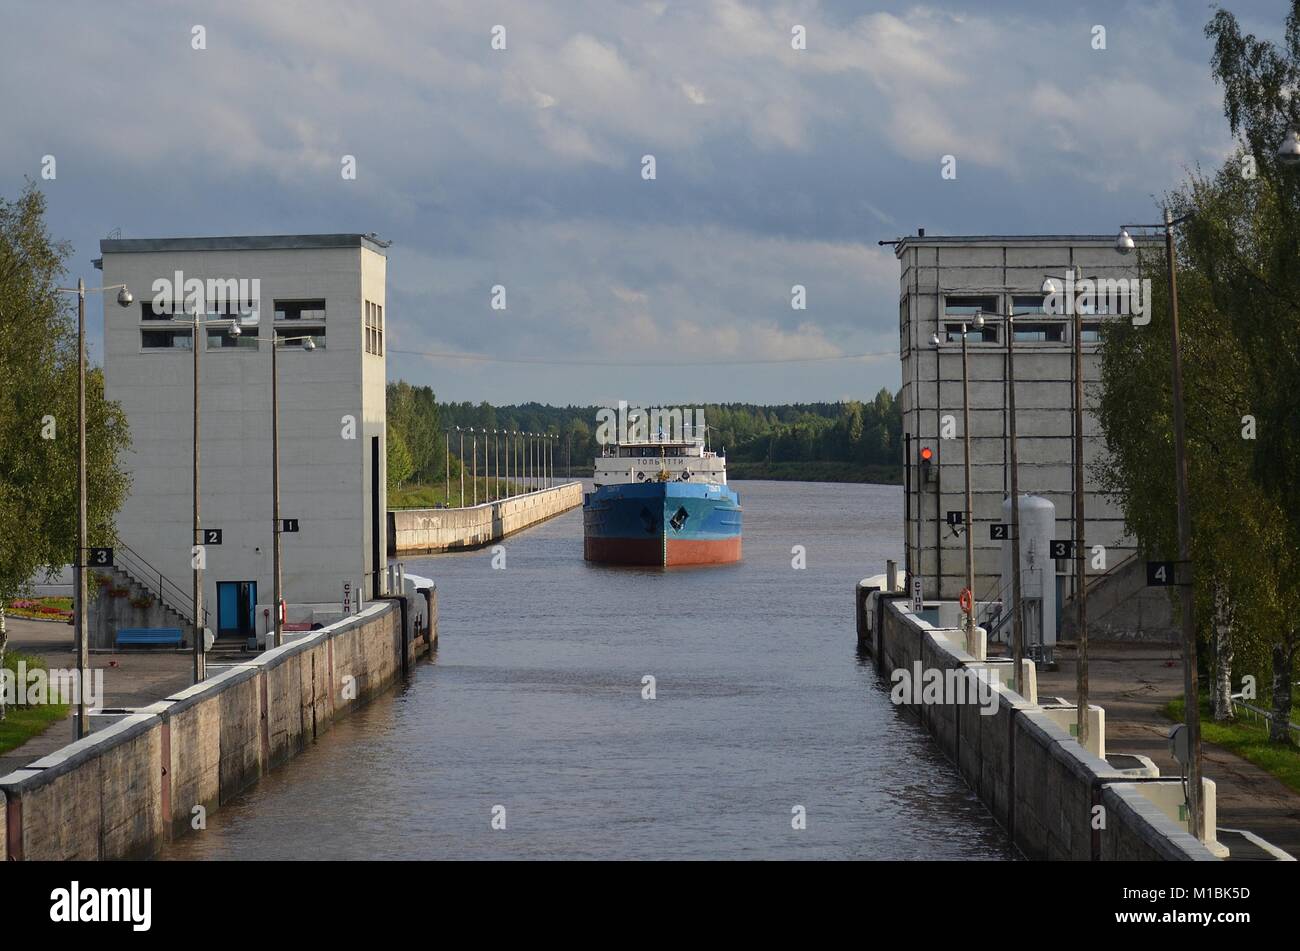 FREIGHTER 'TOLYATTI'  APPROACHING LOCK 1 ON THE KOVZHA RIVER BOUND FOR LAKE LADOGA, RUSSIA. Stock Photo